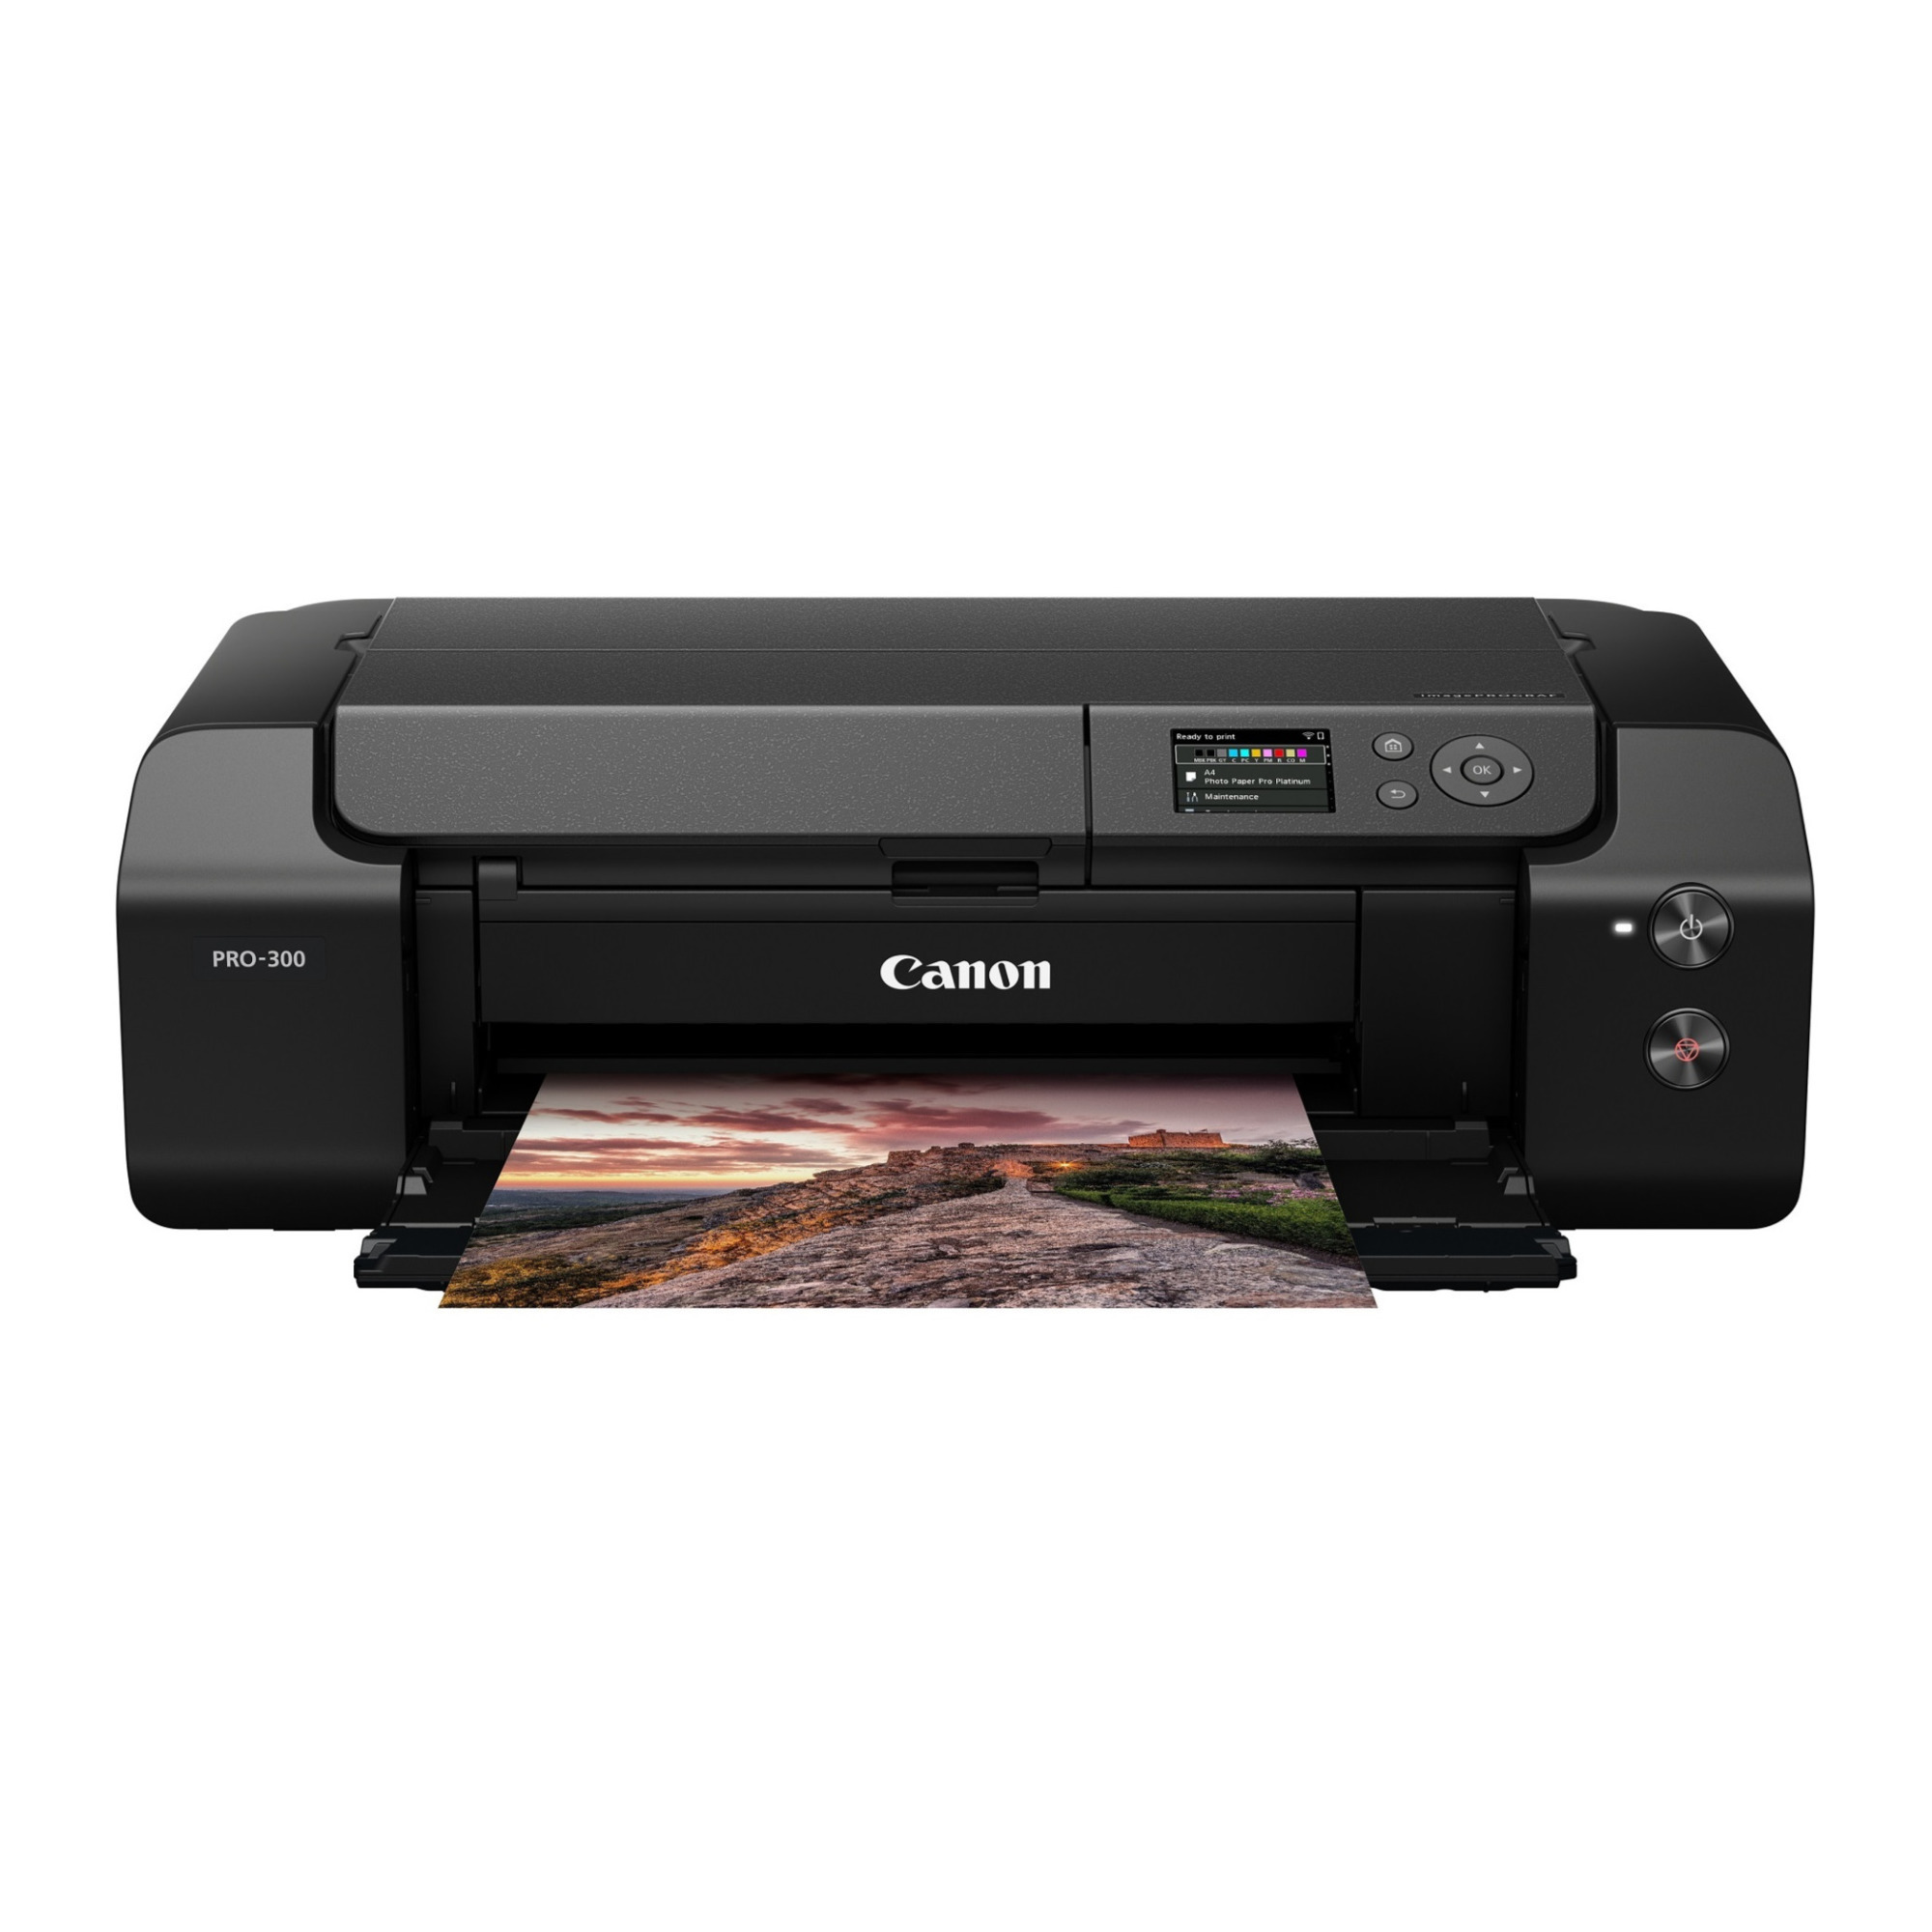 Canon imagePROGRAF PRO-300 Wireless Color Wide-Format Printer, Prints up to 13"X 19", 3.0" LCD Screen with Profession Print &